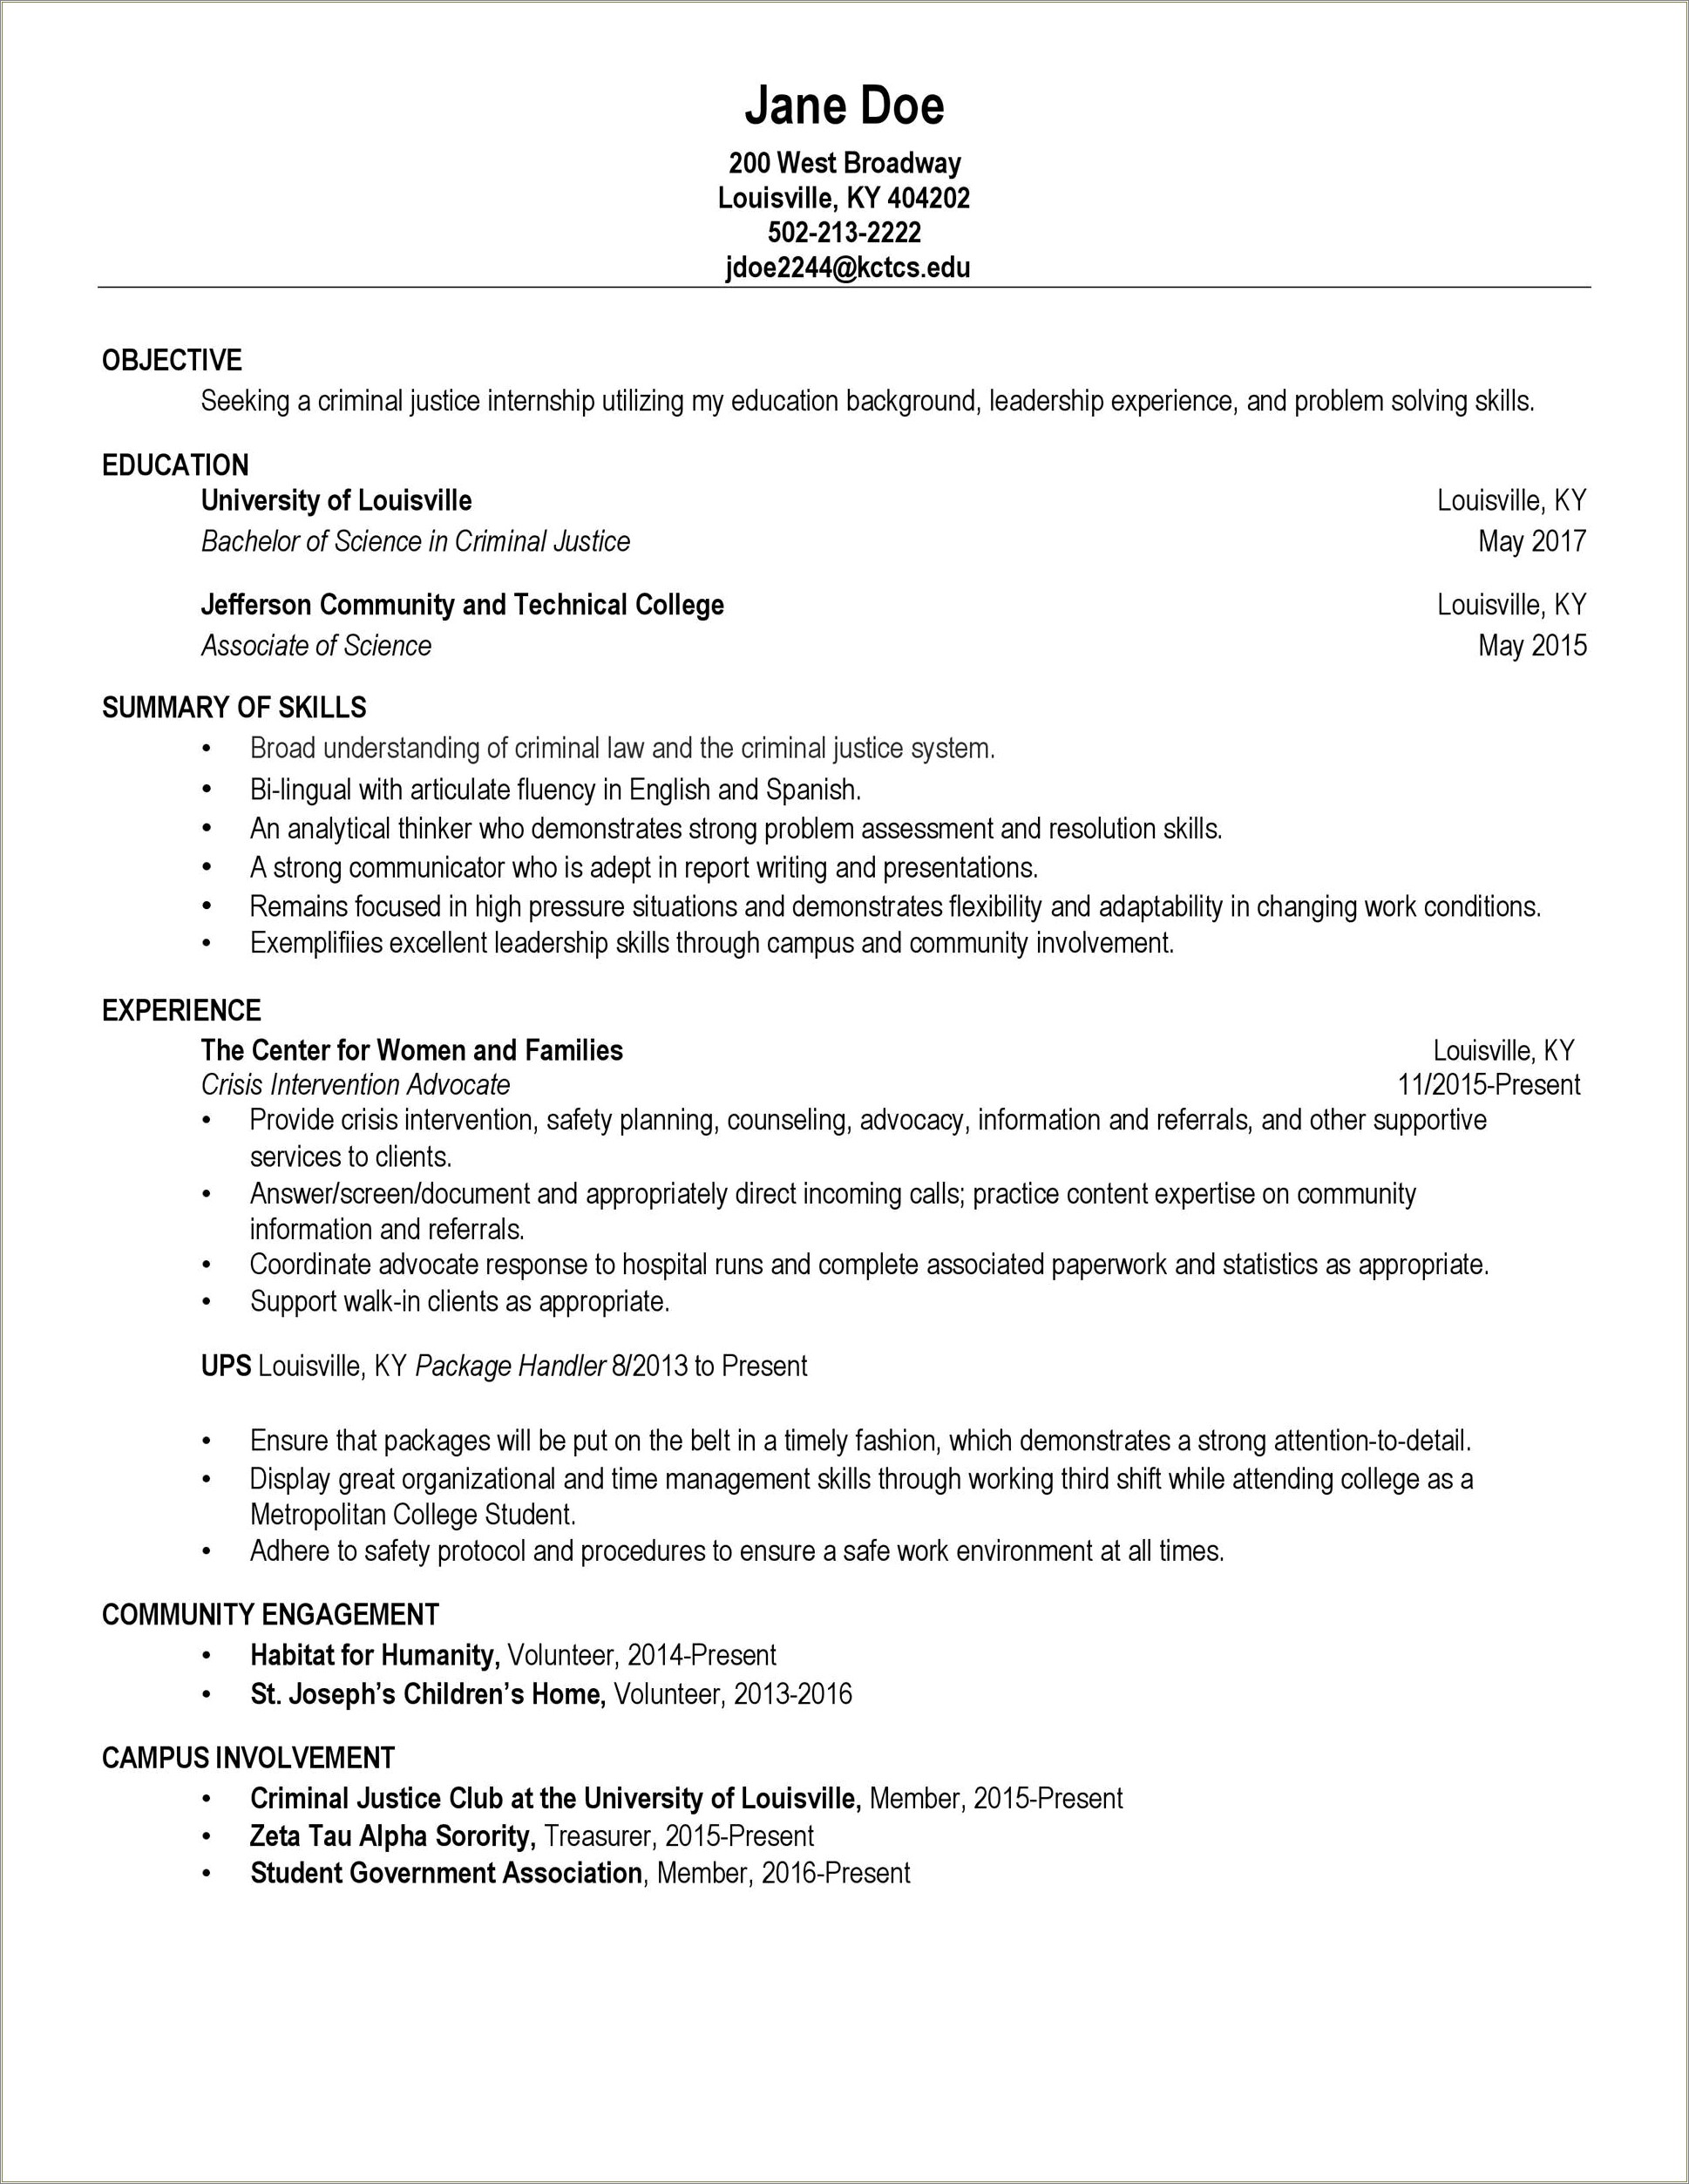 Free Resume Templates 2016 For Government Jobs